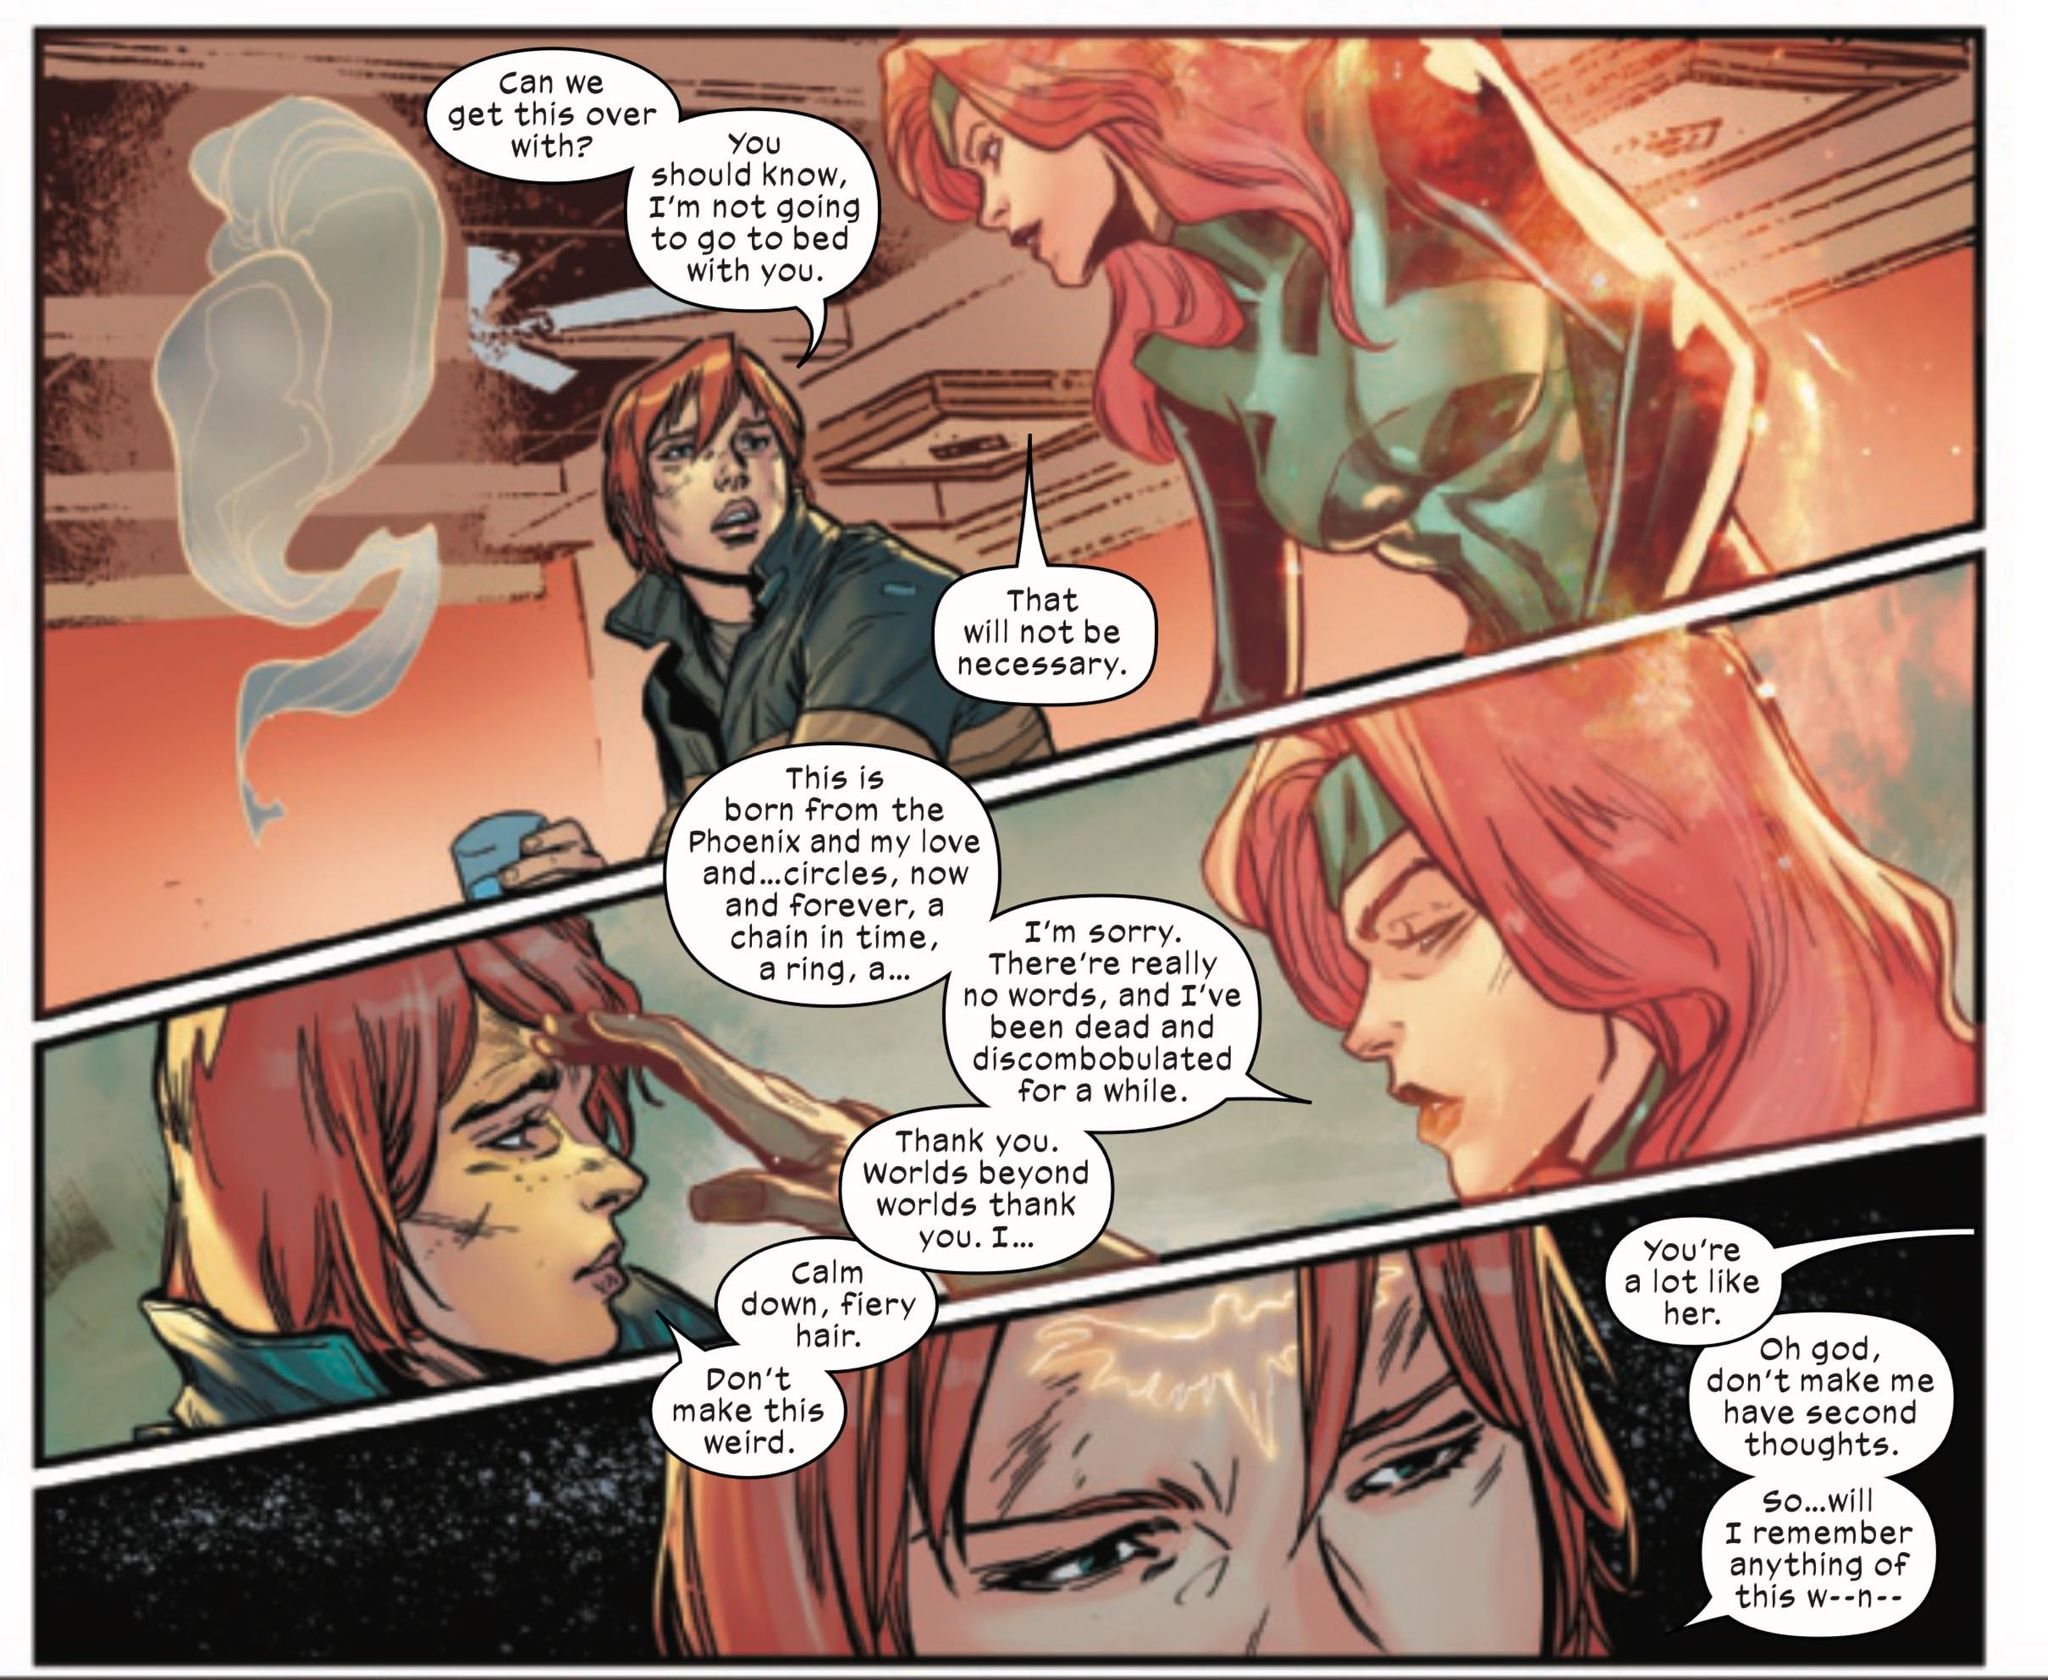 Jean Grey becomes Hope Summers' father (kinda)